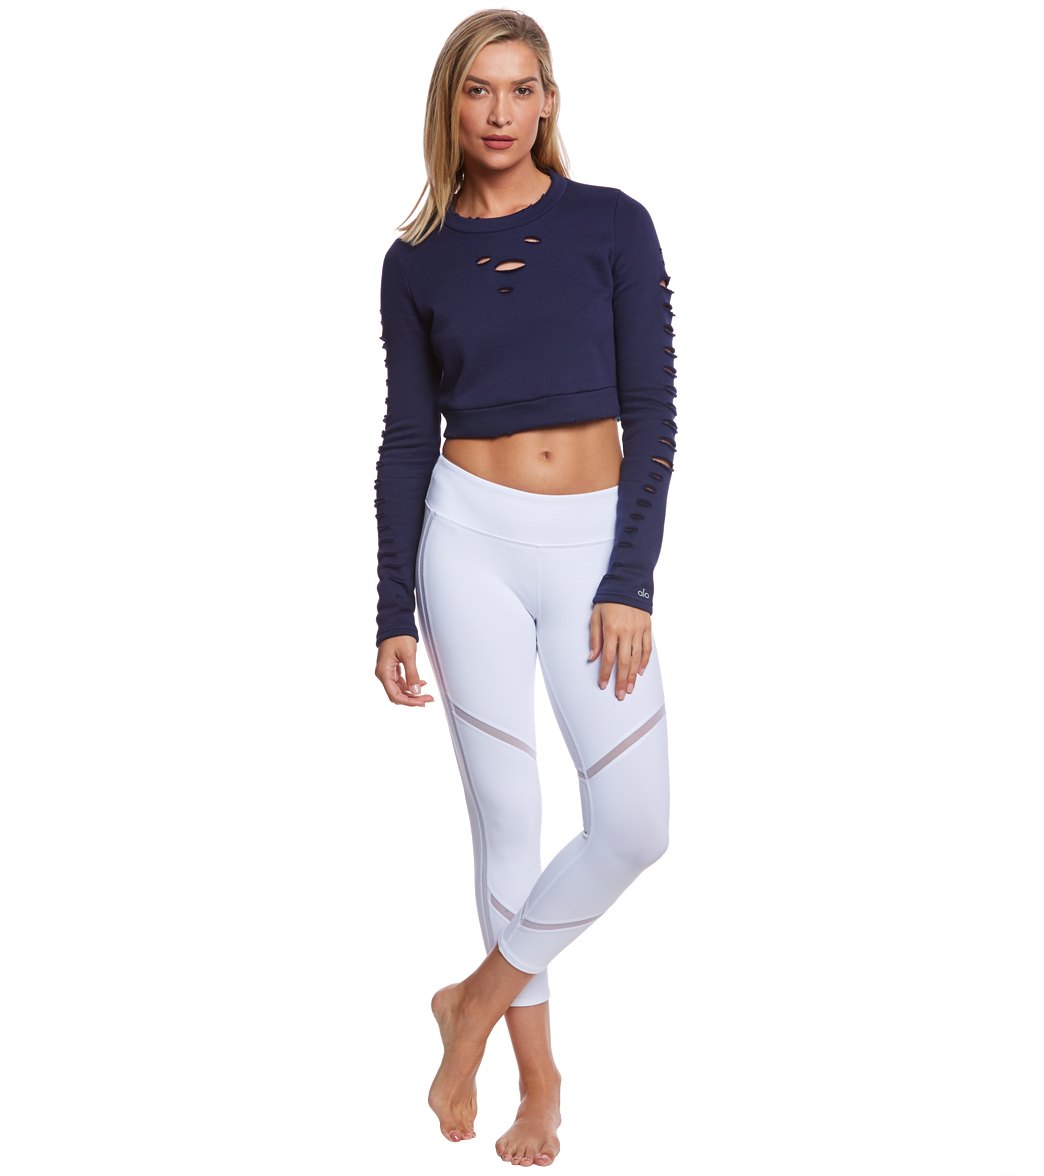 Alo Yoga Ripped Warrior Yoga Long Sleeve Top at YogaOutlet.com